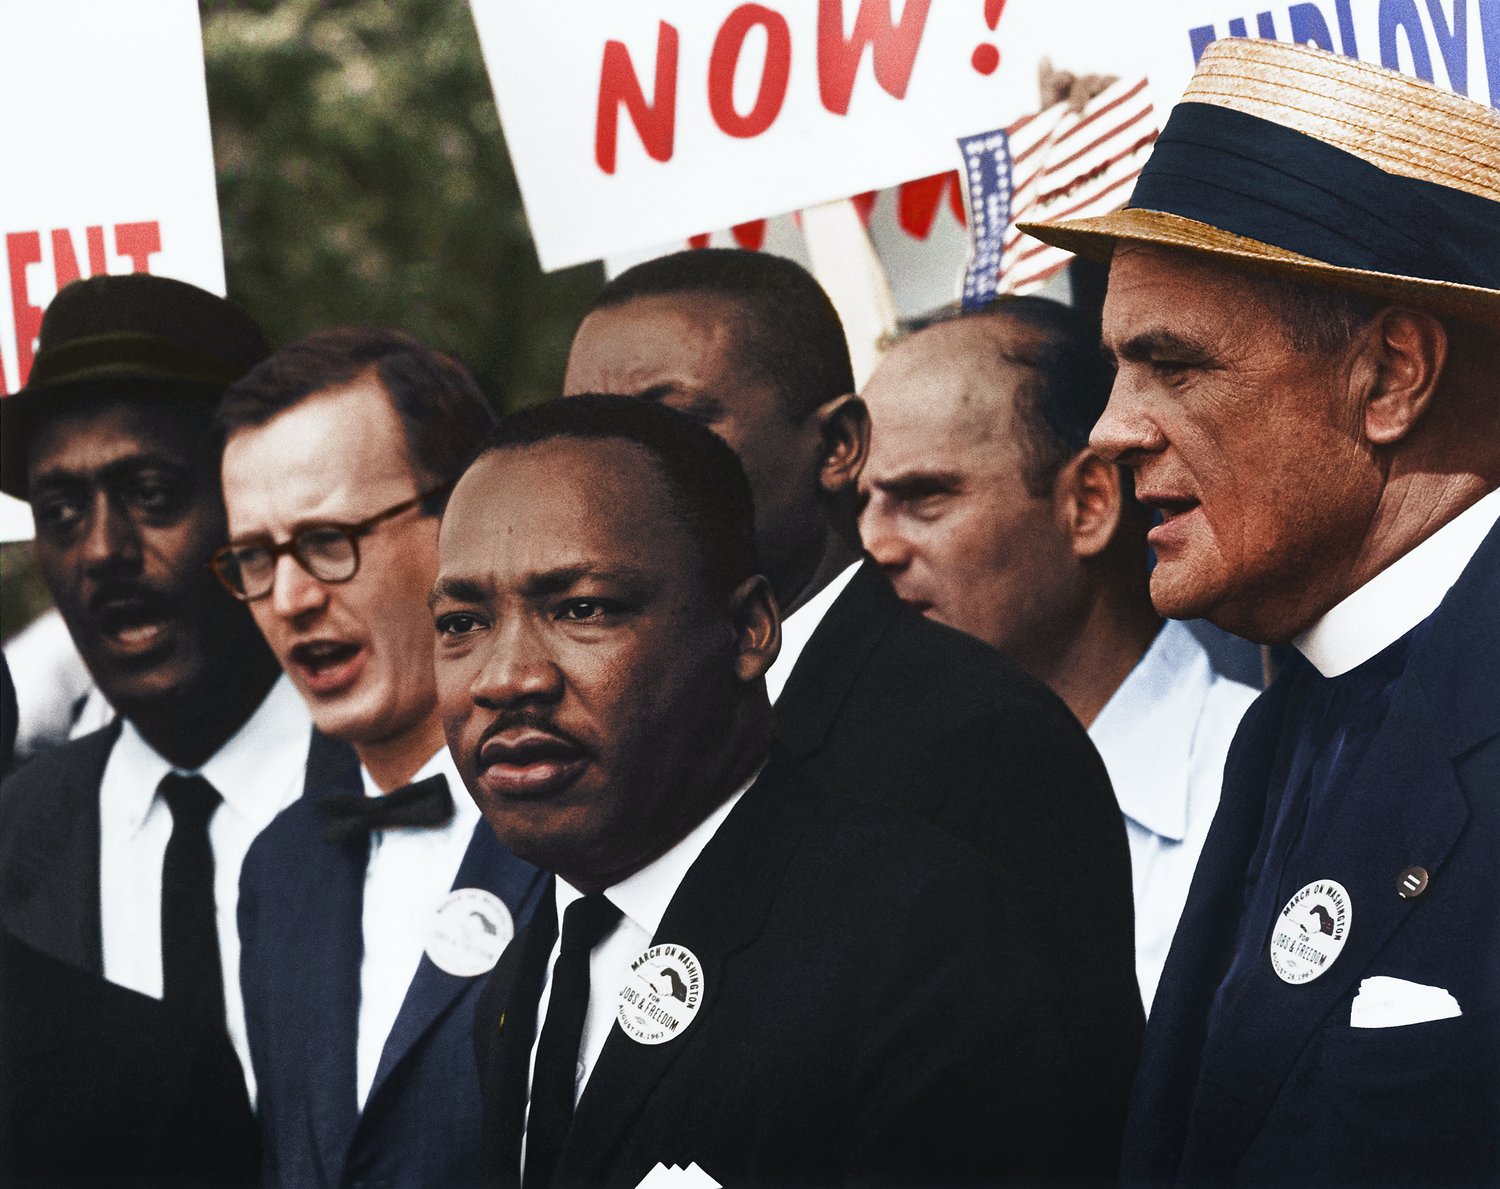 "[Civil Rights March on Washington, D.C. [Dr. Martin Luther King, Jr. and Mathew Ahmann in a crowd.], 8/28/1963" Original black and white negative by Rowland Scherman. Taken August 28th, 1963, Washington D.C, United States (The National Archives and Records Administration). Colorized by Jordan J. Lloyd. U.S. Information Agency. Press and Publications Service. ca. 1953-ca. 1978. https://catalog.archives.gov/id/542015 (Washington, D.C.)